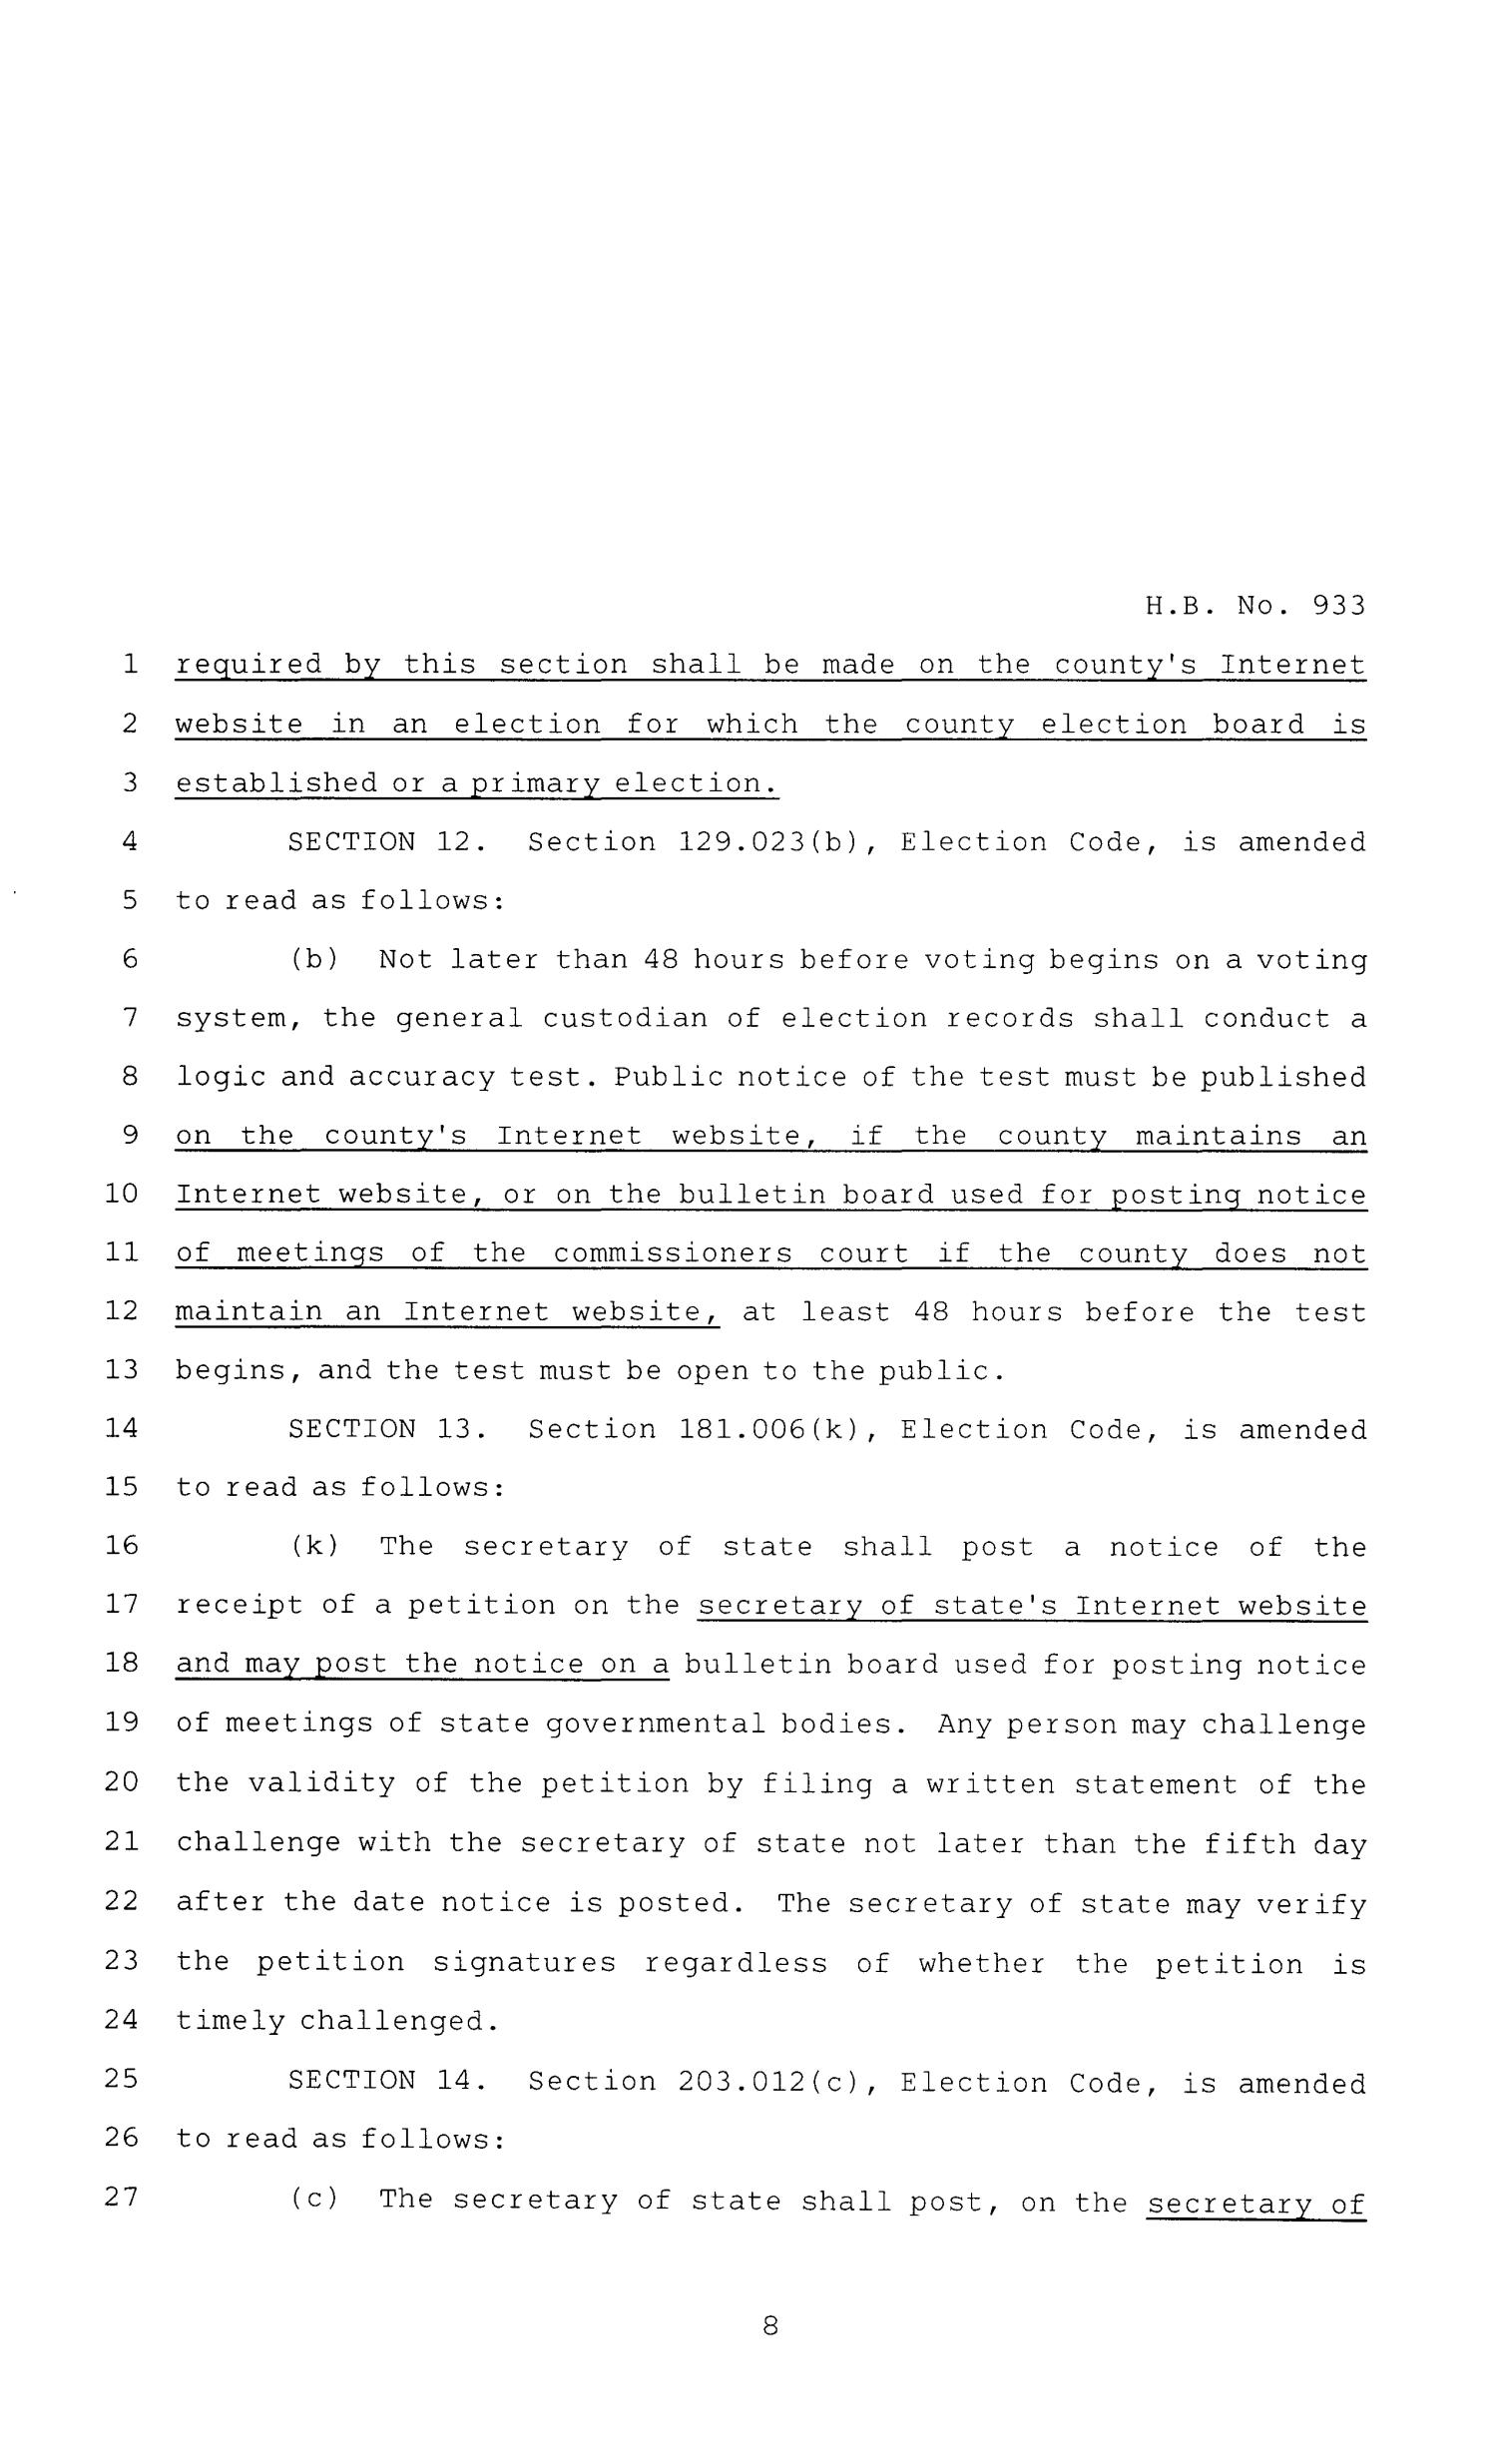 86th Texas Legislature, Regular Session, House Bill 933, Chapter 1052
                                                
                                                    [Sequence #]: 8 of 10
                                                